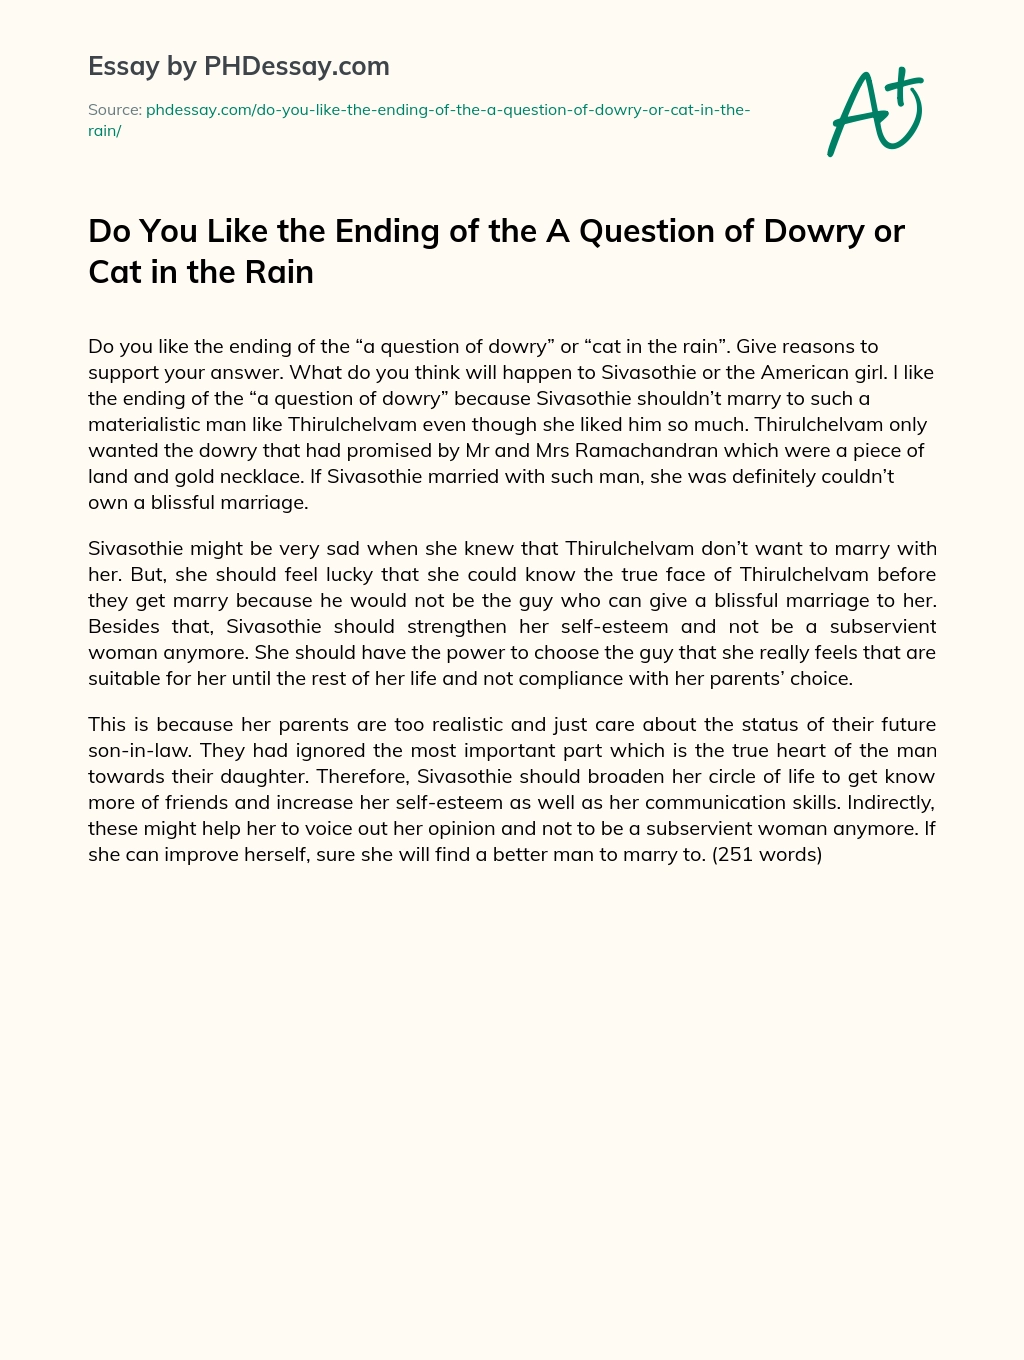 Do You Like the Ending of the A Question of Dowry or Cat in the Rain essay